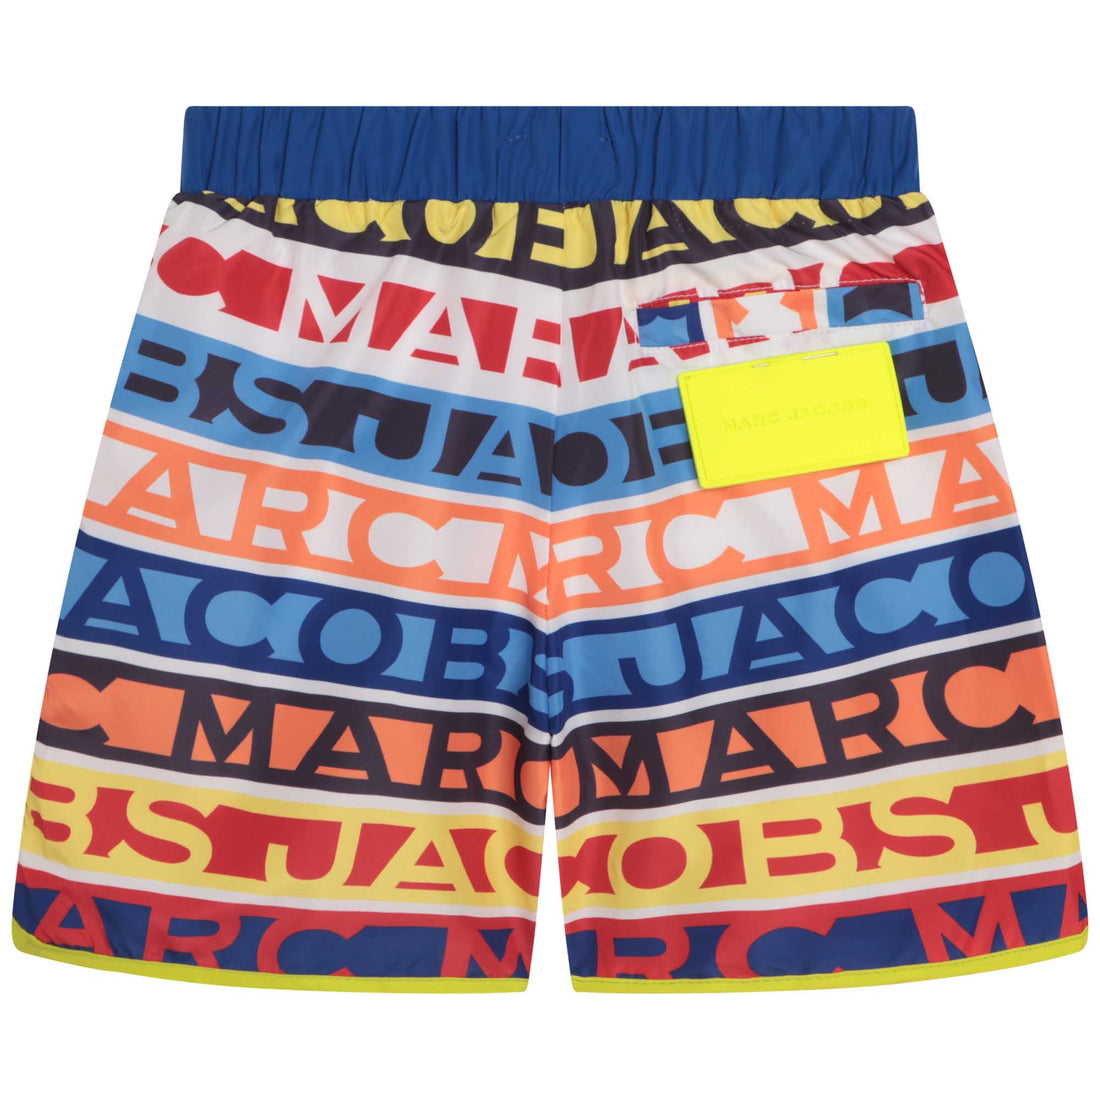 Marc Jacobs Swimming Short Style: W20081